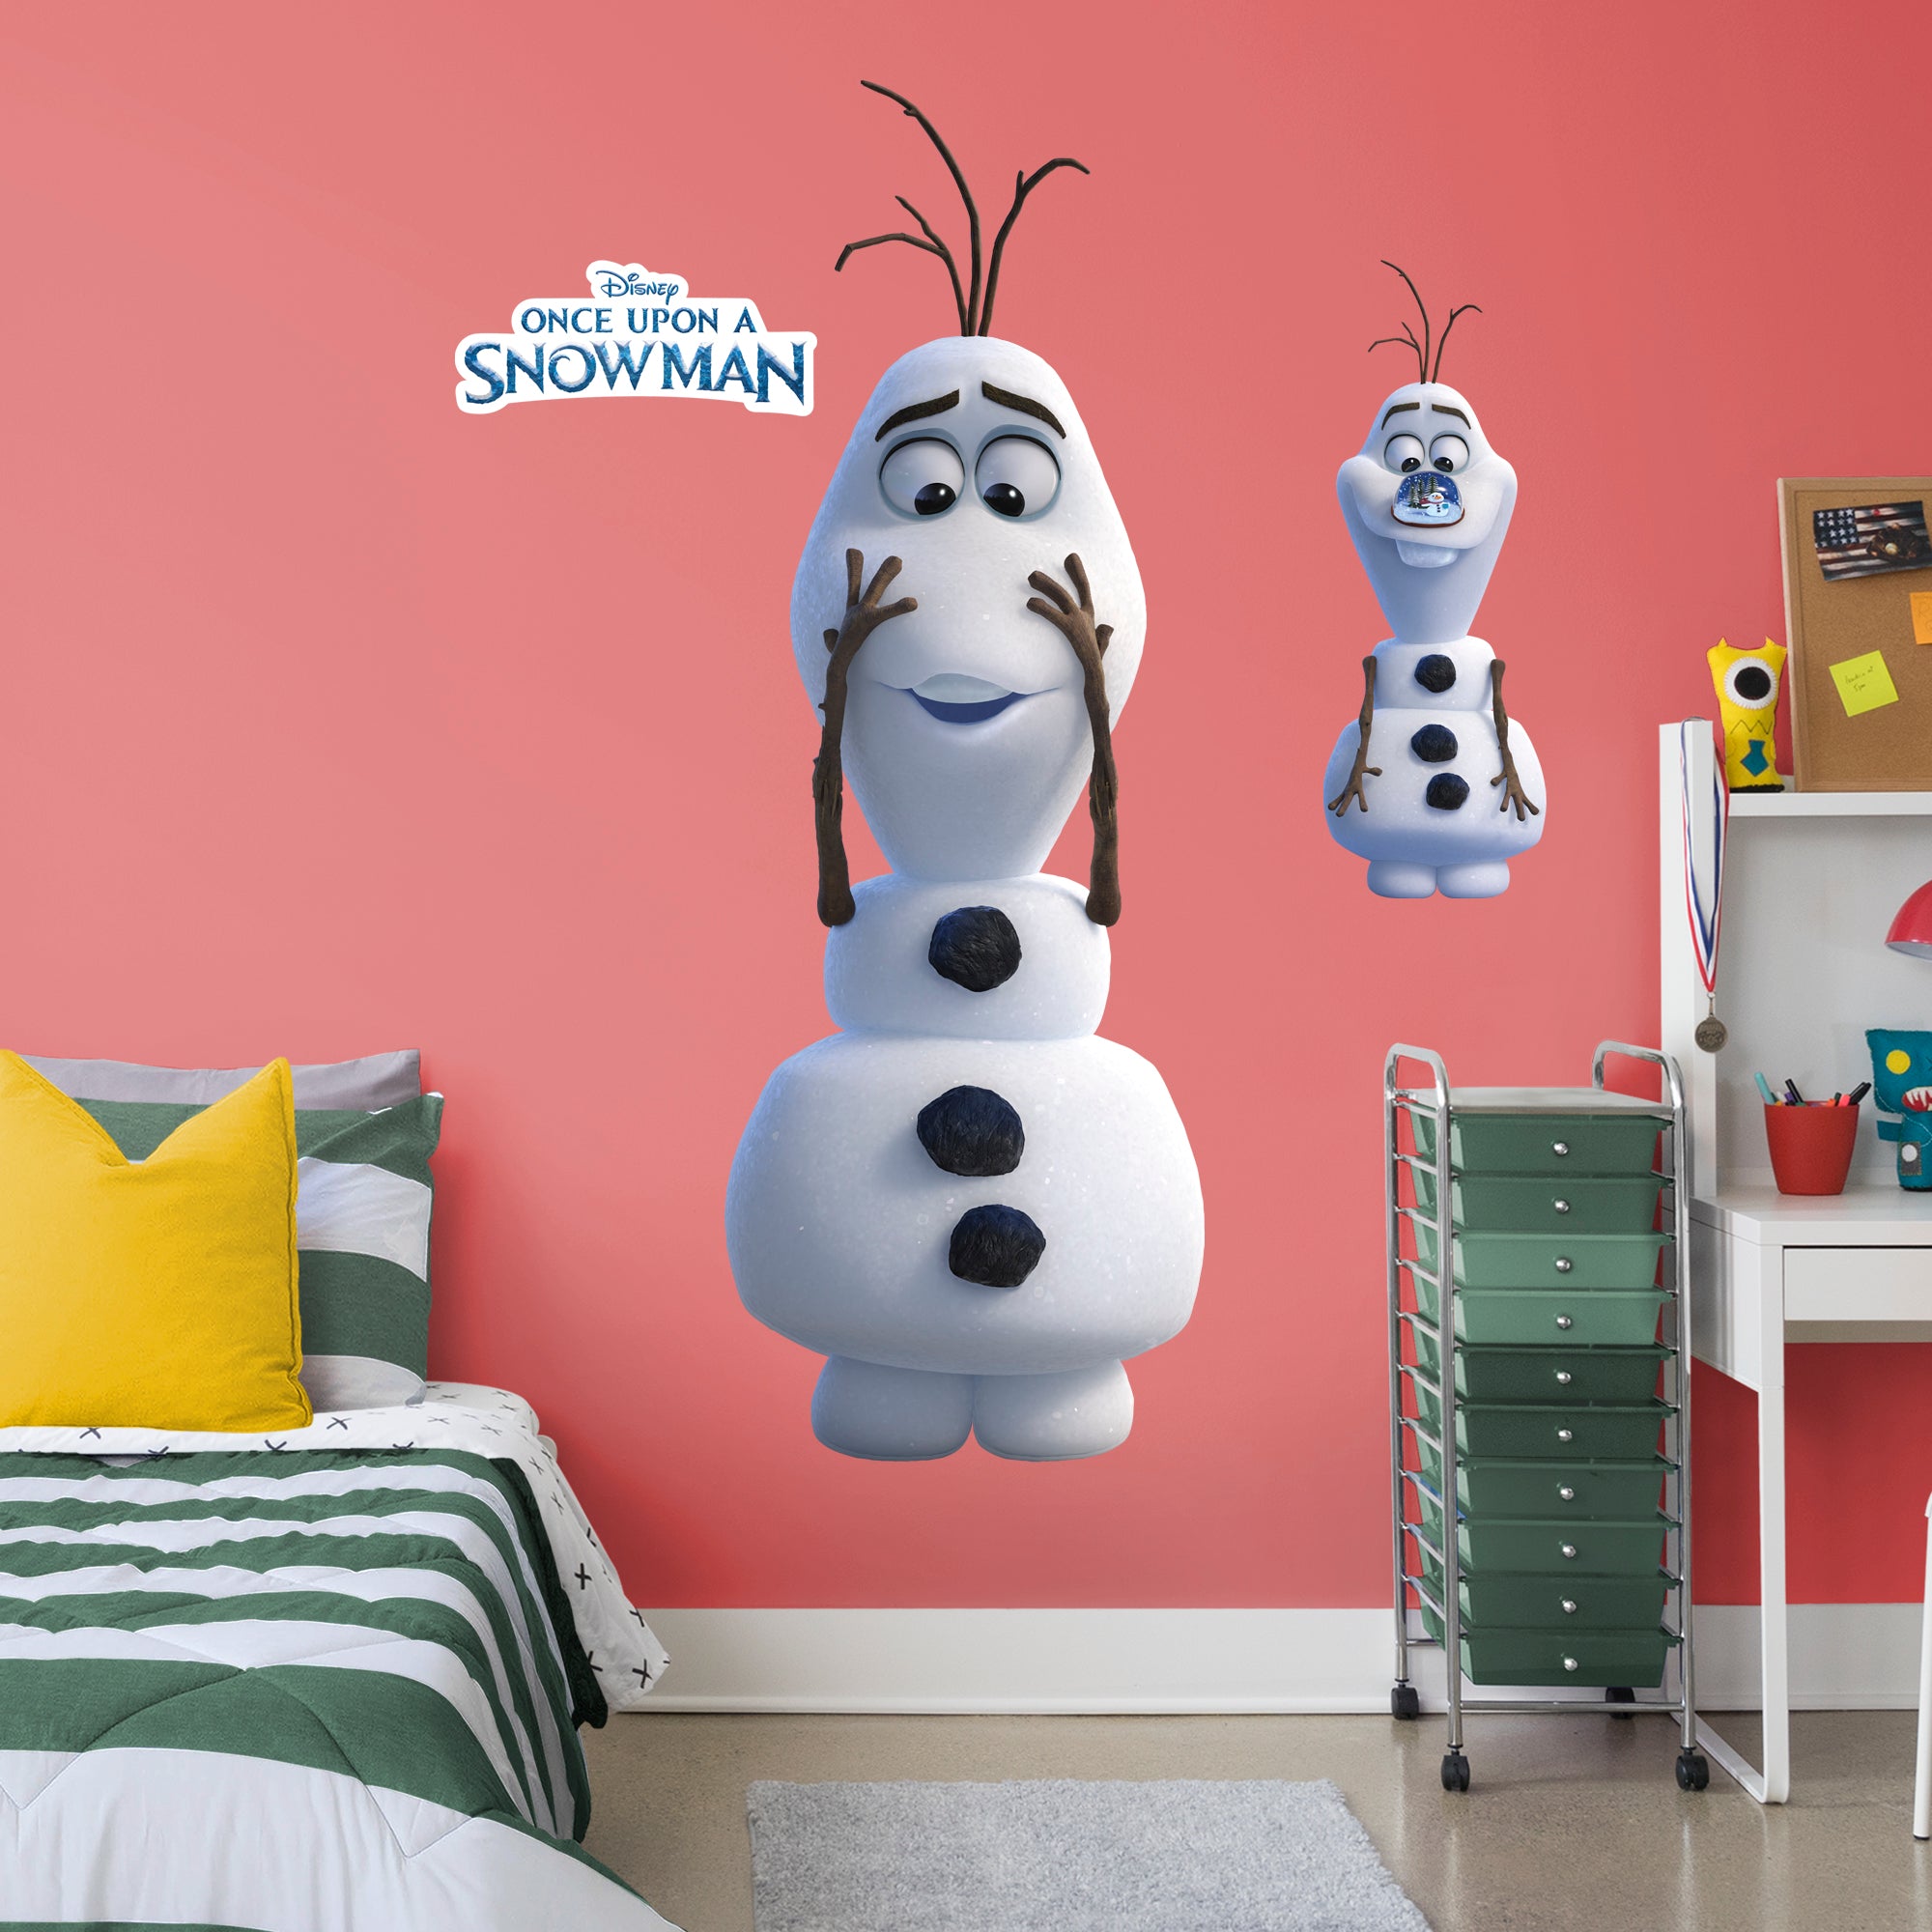 Olaf: Nose - Once Upon A Snowman - Officially Licensed Disney Removable Wall Decal Life-Size Character + 2 Decals by Fathead | V